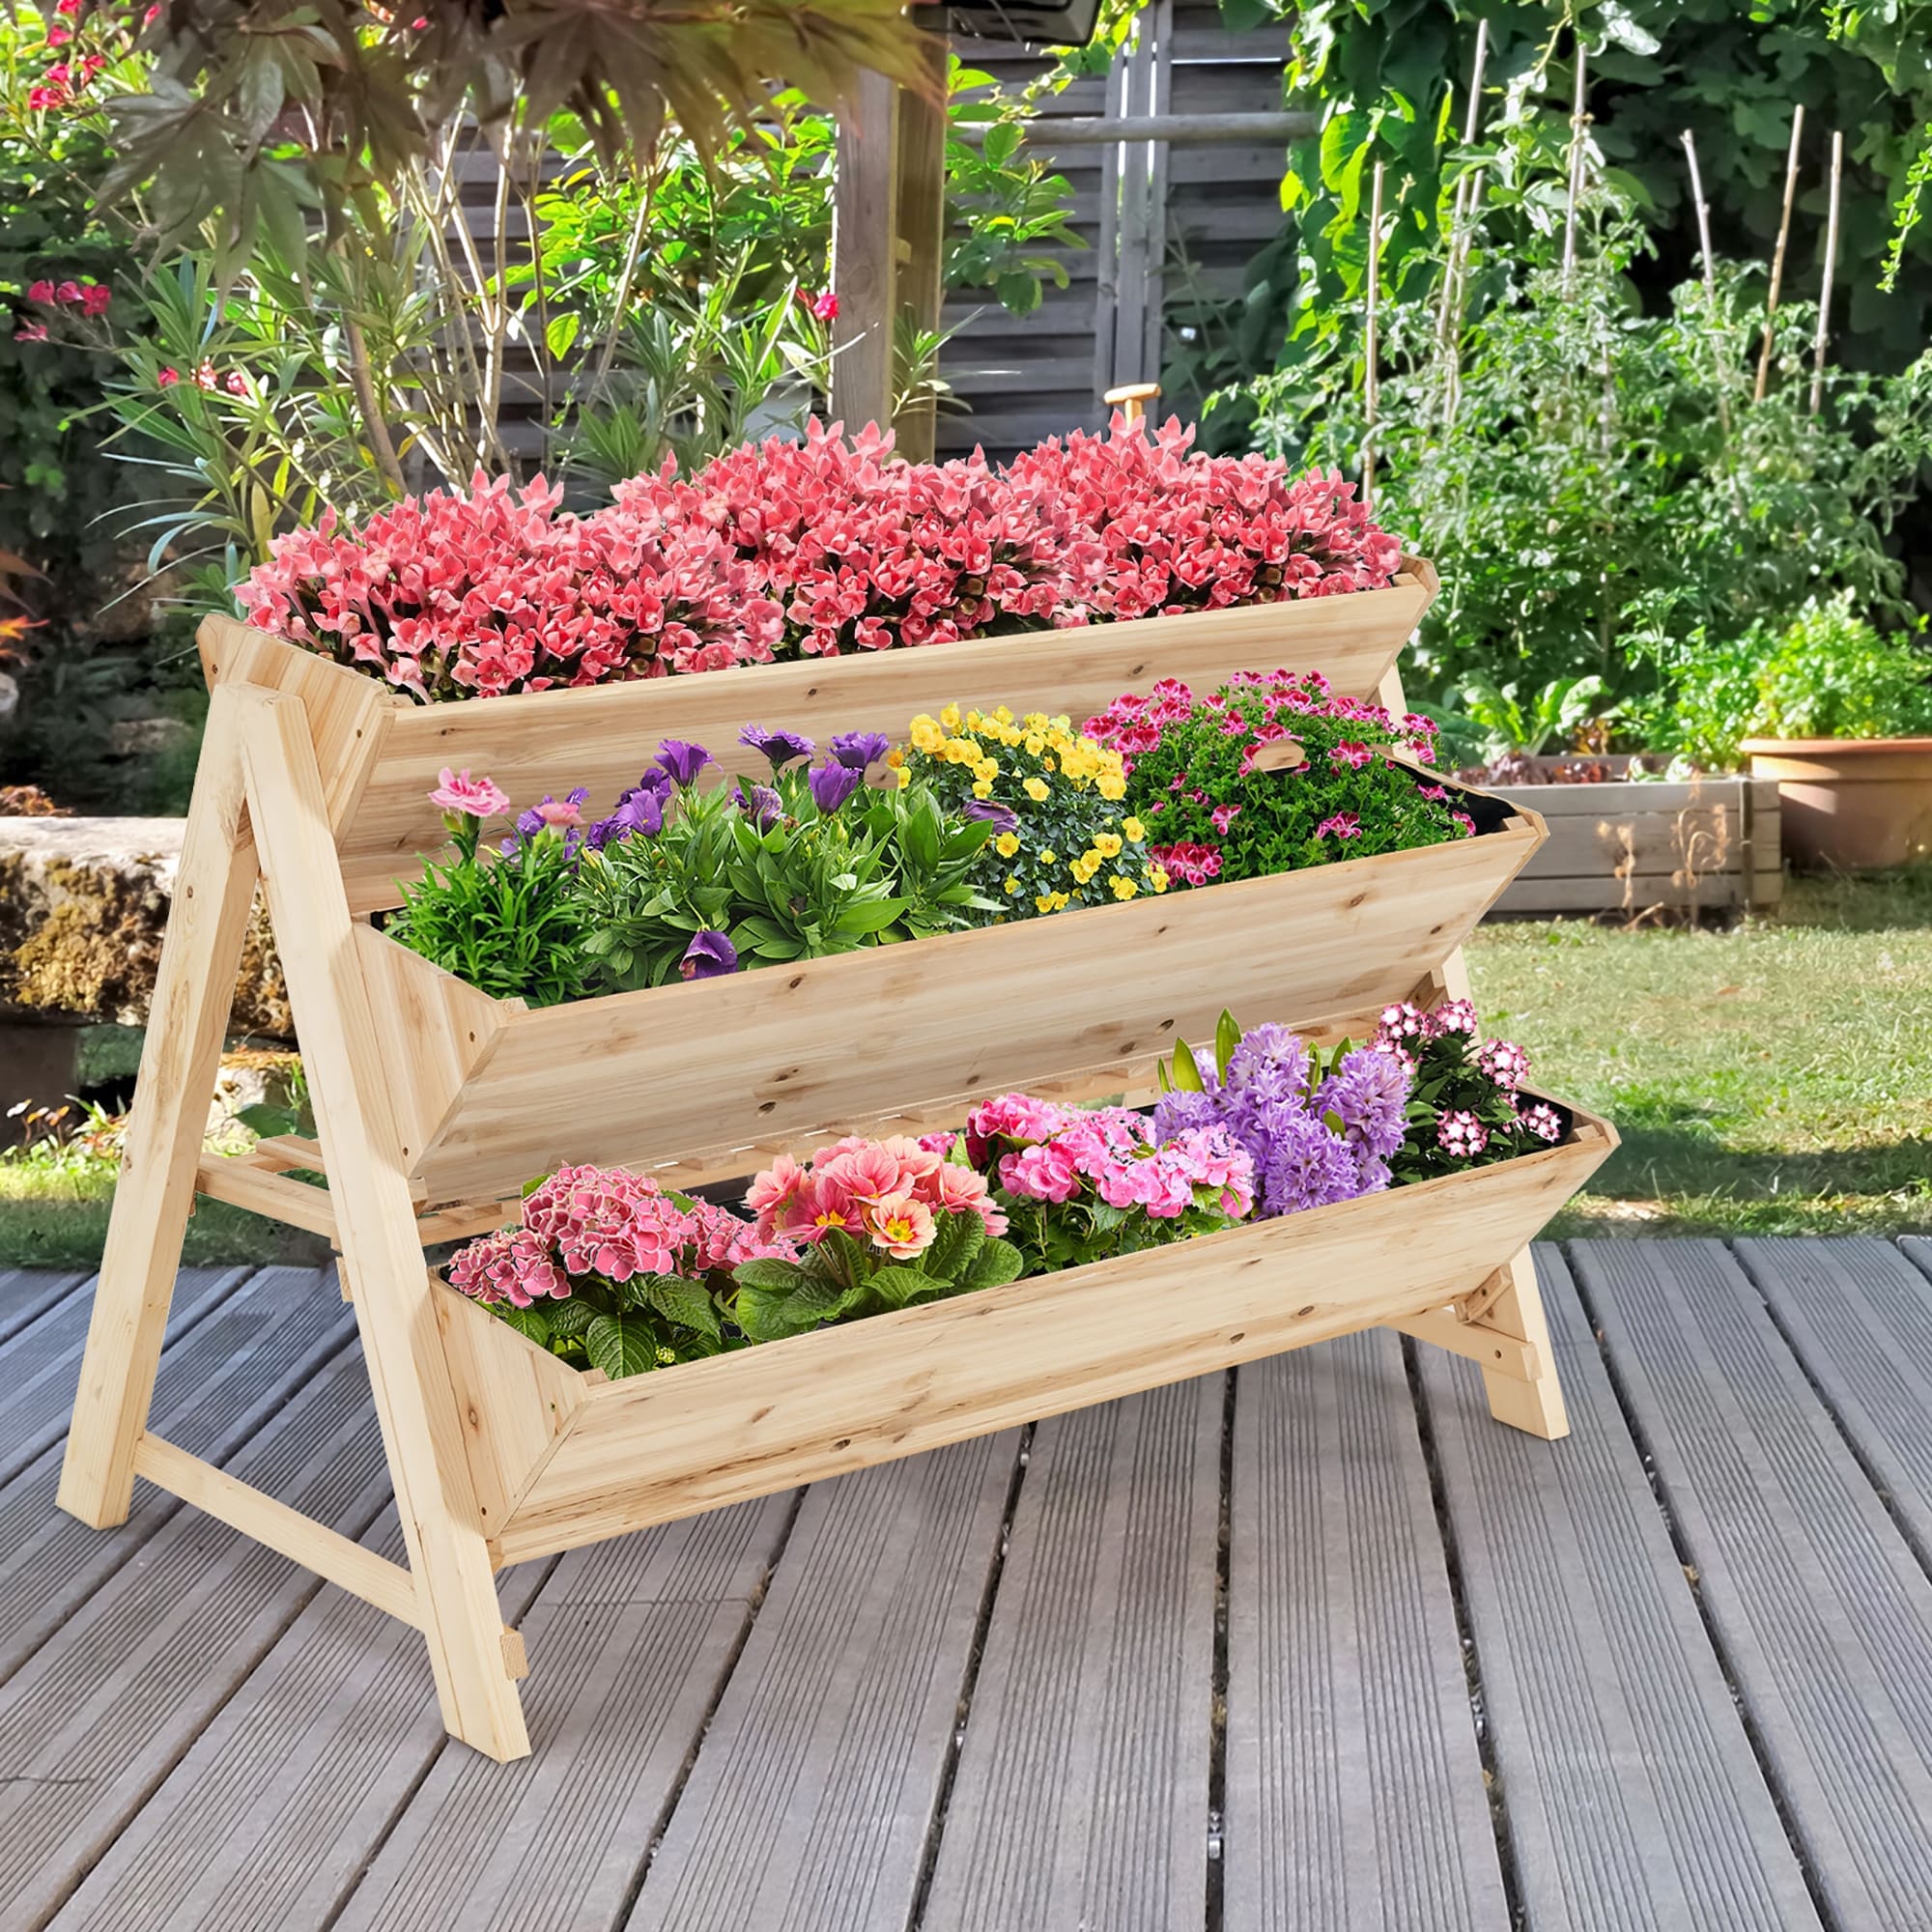 https://ak1.ostkcdn.com/images/products/is/images/direct/803178e70cedf58f33cd0f4e3f9f209563be84d8/3-Tier-Wooden-Vertical-Raised-Garden-Bed-w-Storage-Shelf-%26-Side-Hook.jpg